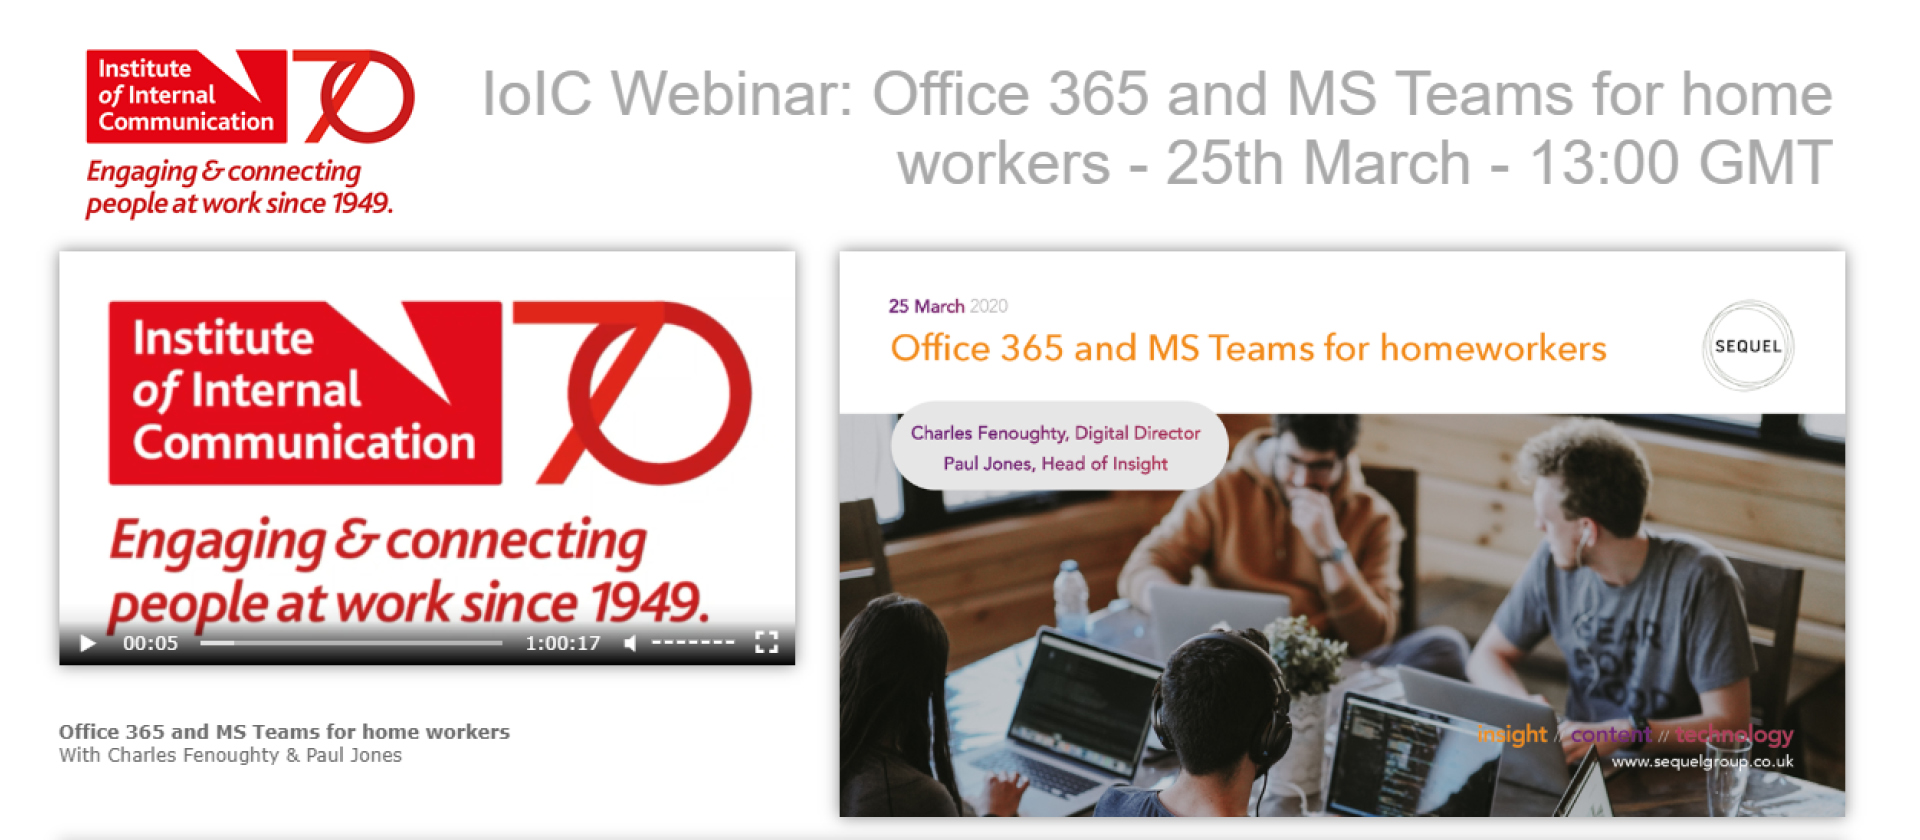 Sequel Group & IoIC running a webinar on 365 & MS Teams for home workers